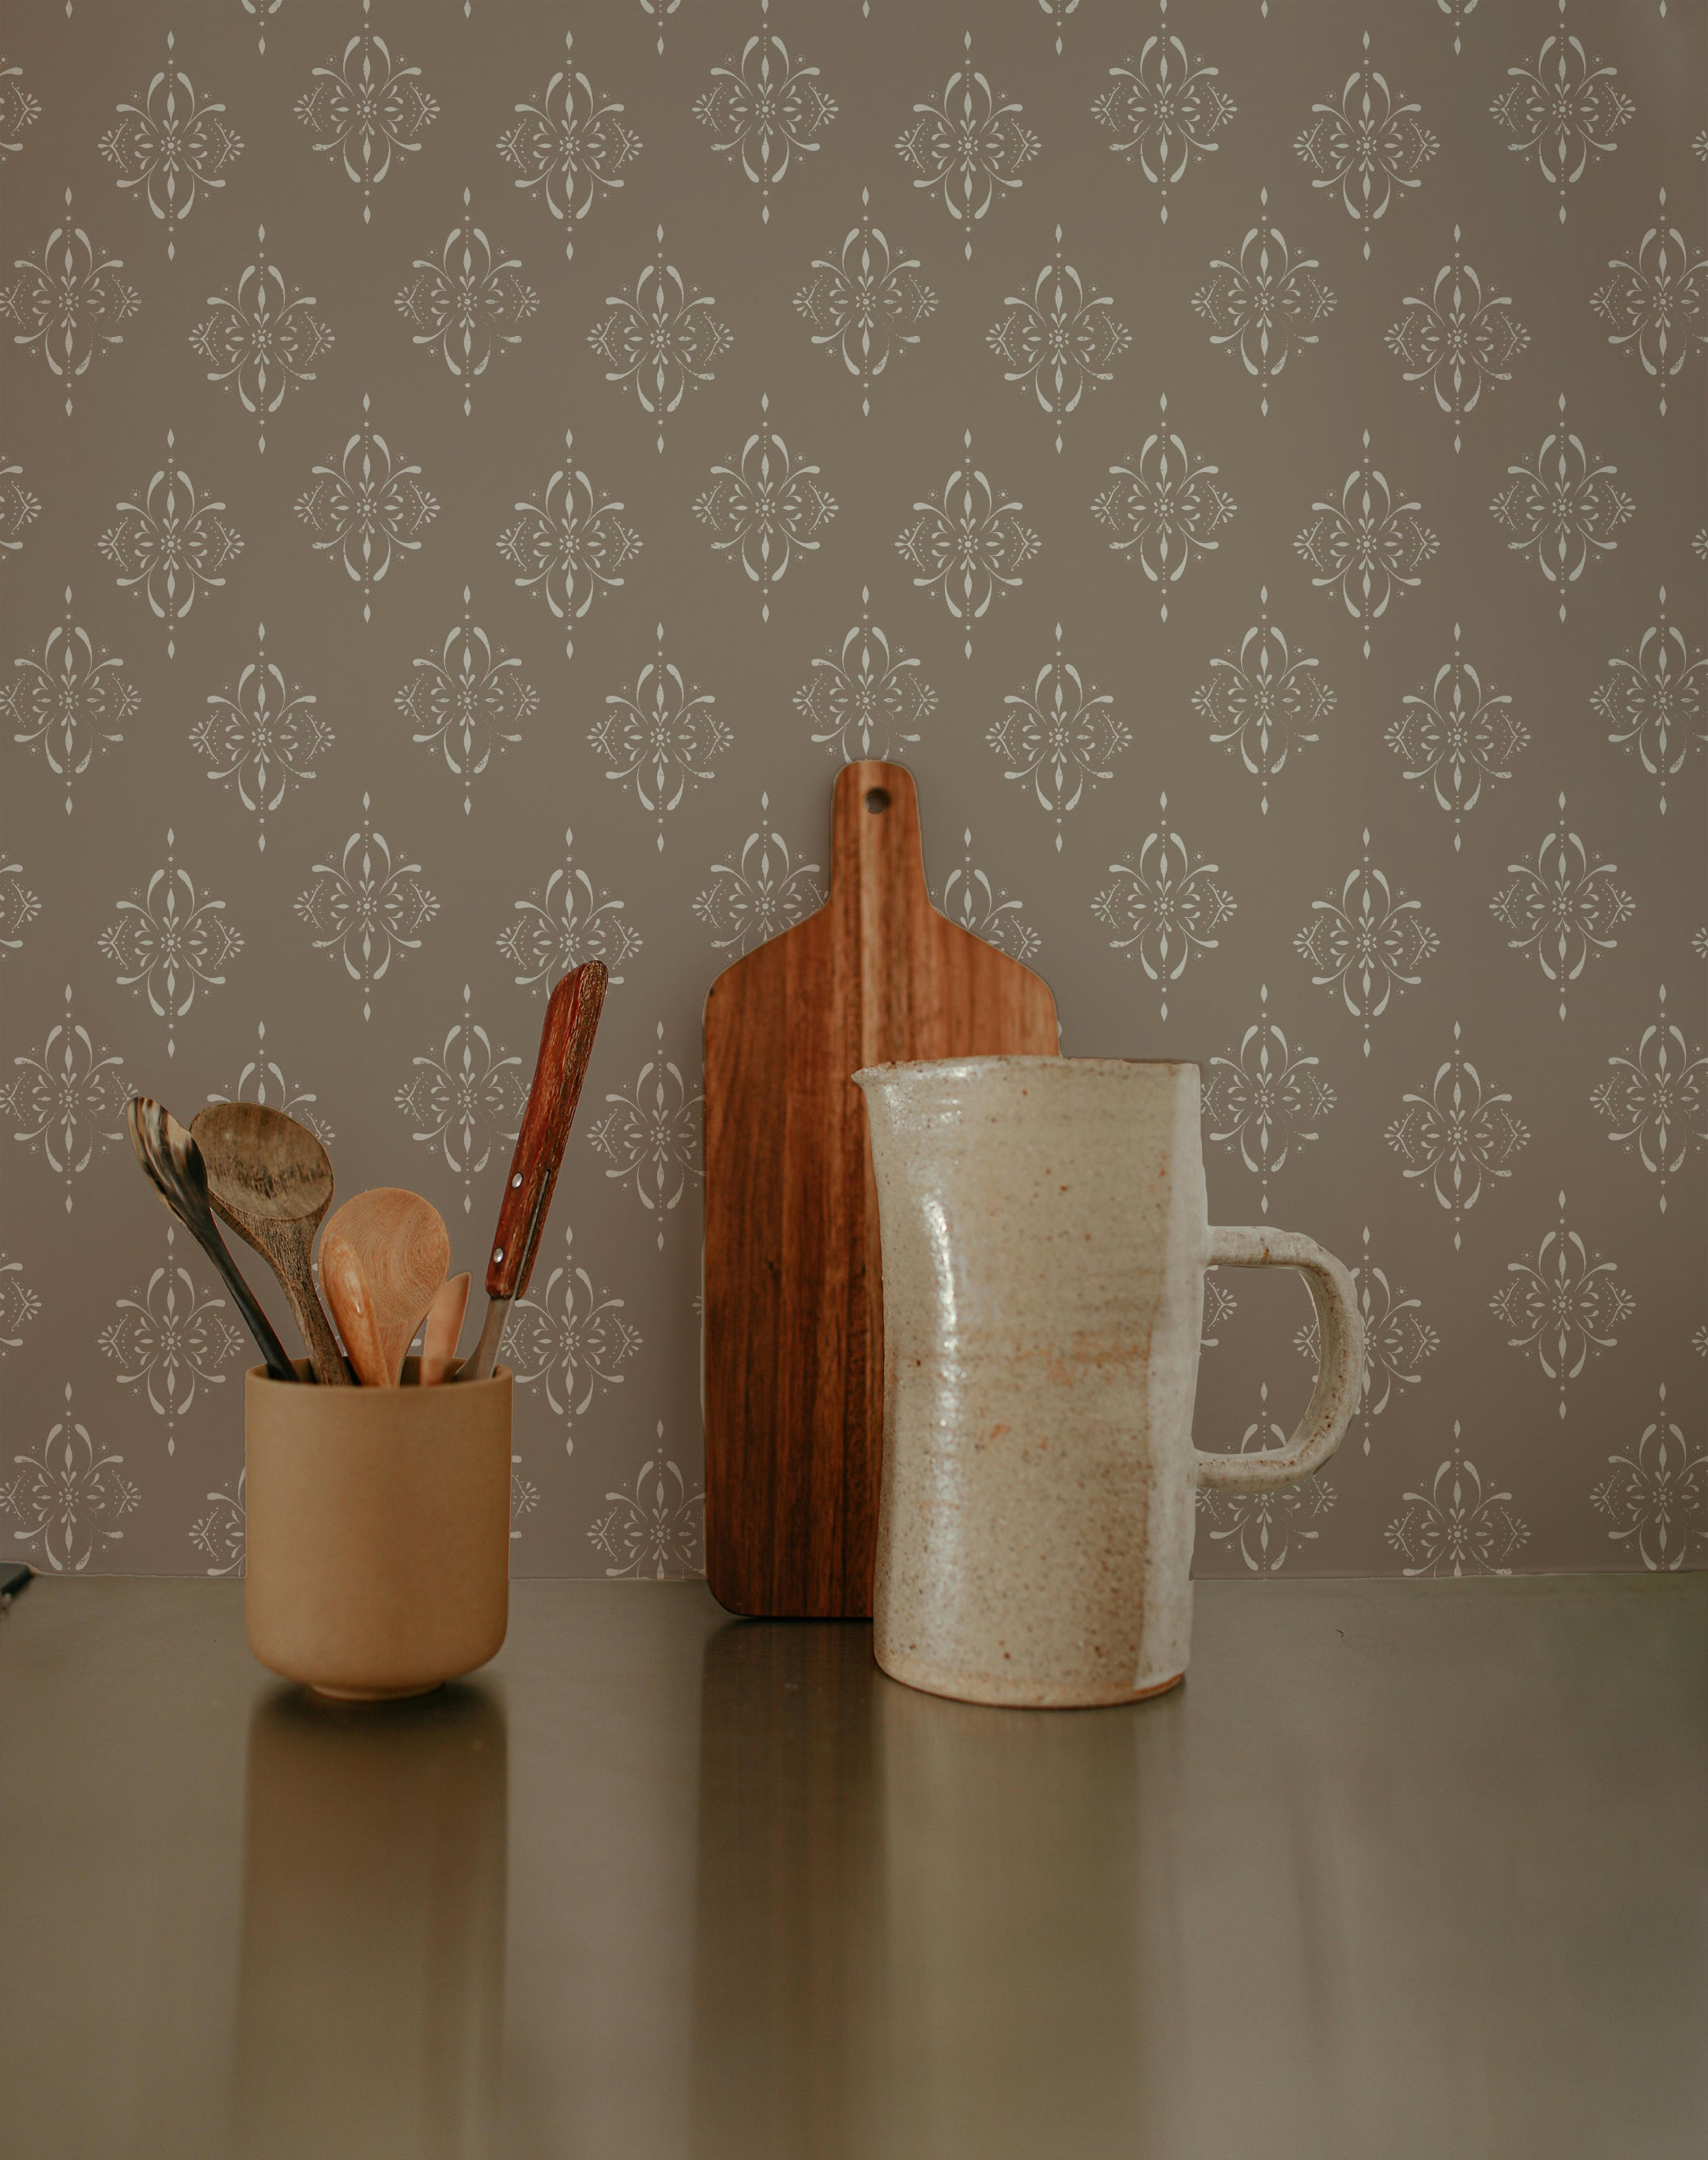 A stylish kitchen setup featuring rustic elegance wallpaper with a refined floral pattern and intricate medallions. The wallpaper, with its vintage charm, enhances the space's sophisticated look. On the countertop, there is a ceramic mug, a wooden cutting board, and a small cup holding wooden utensils, adding a touch of rustic elegance to the decor